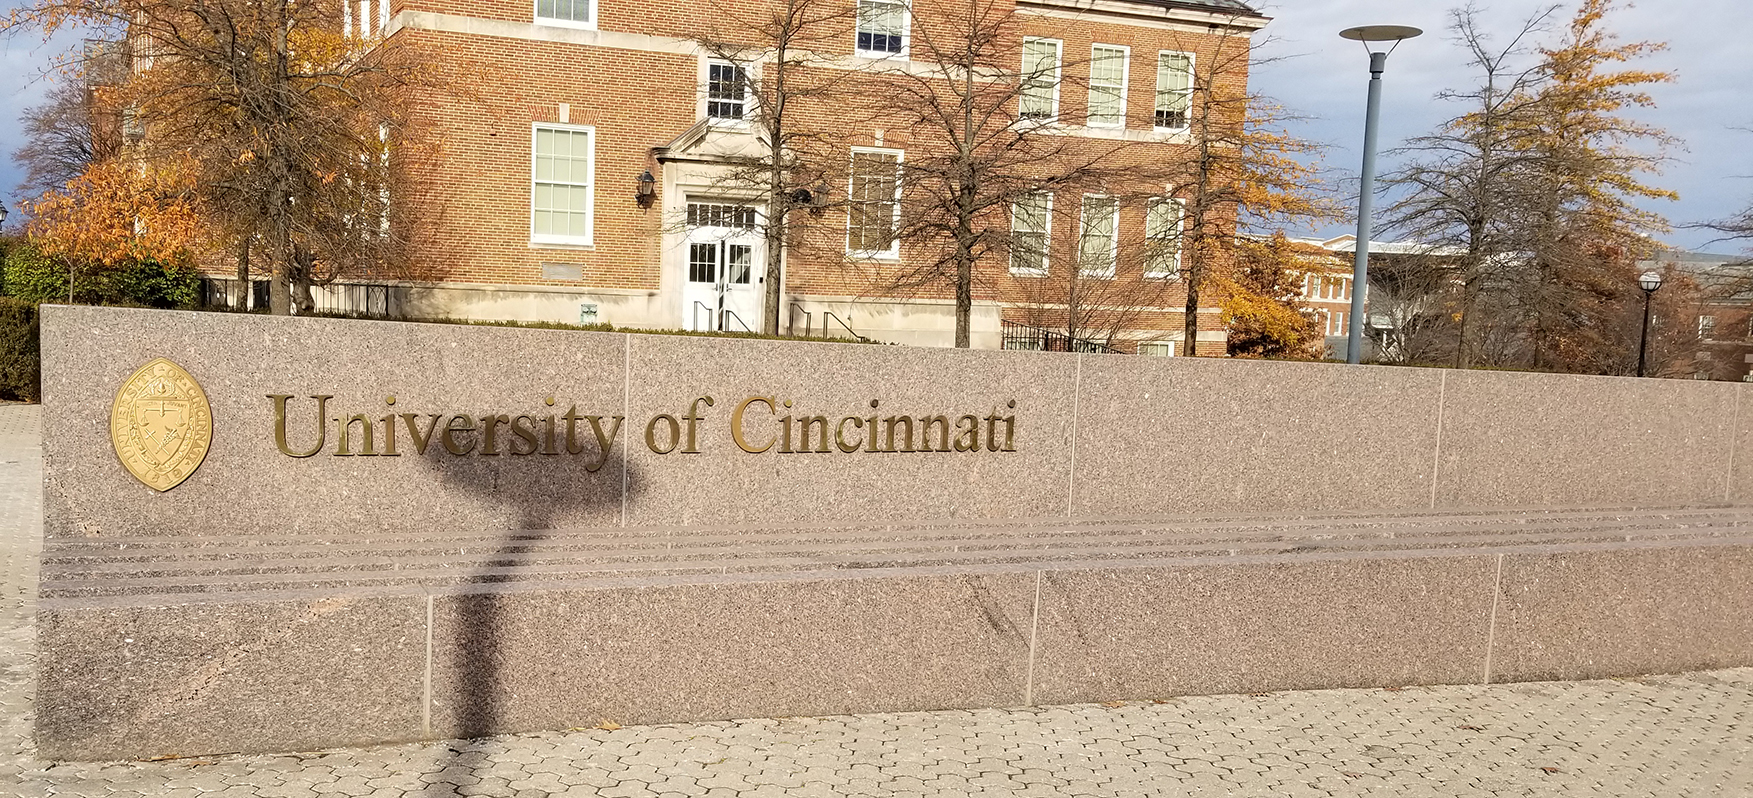 University of Cincinnati sign on a bench in front of a building and trees